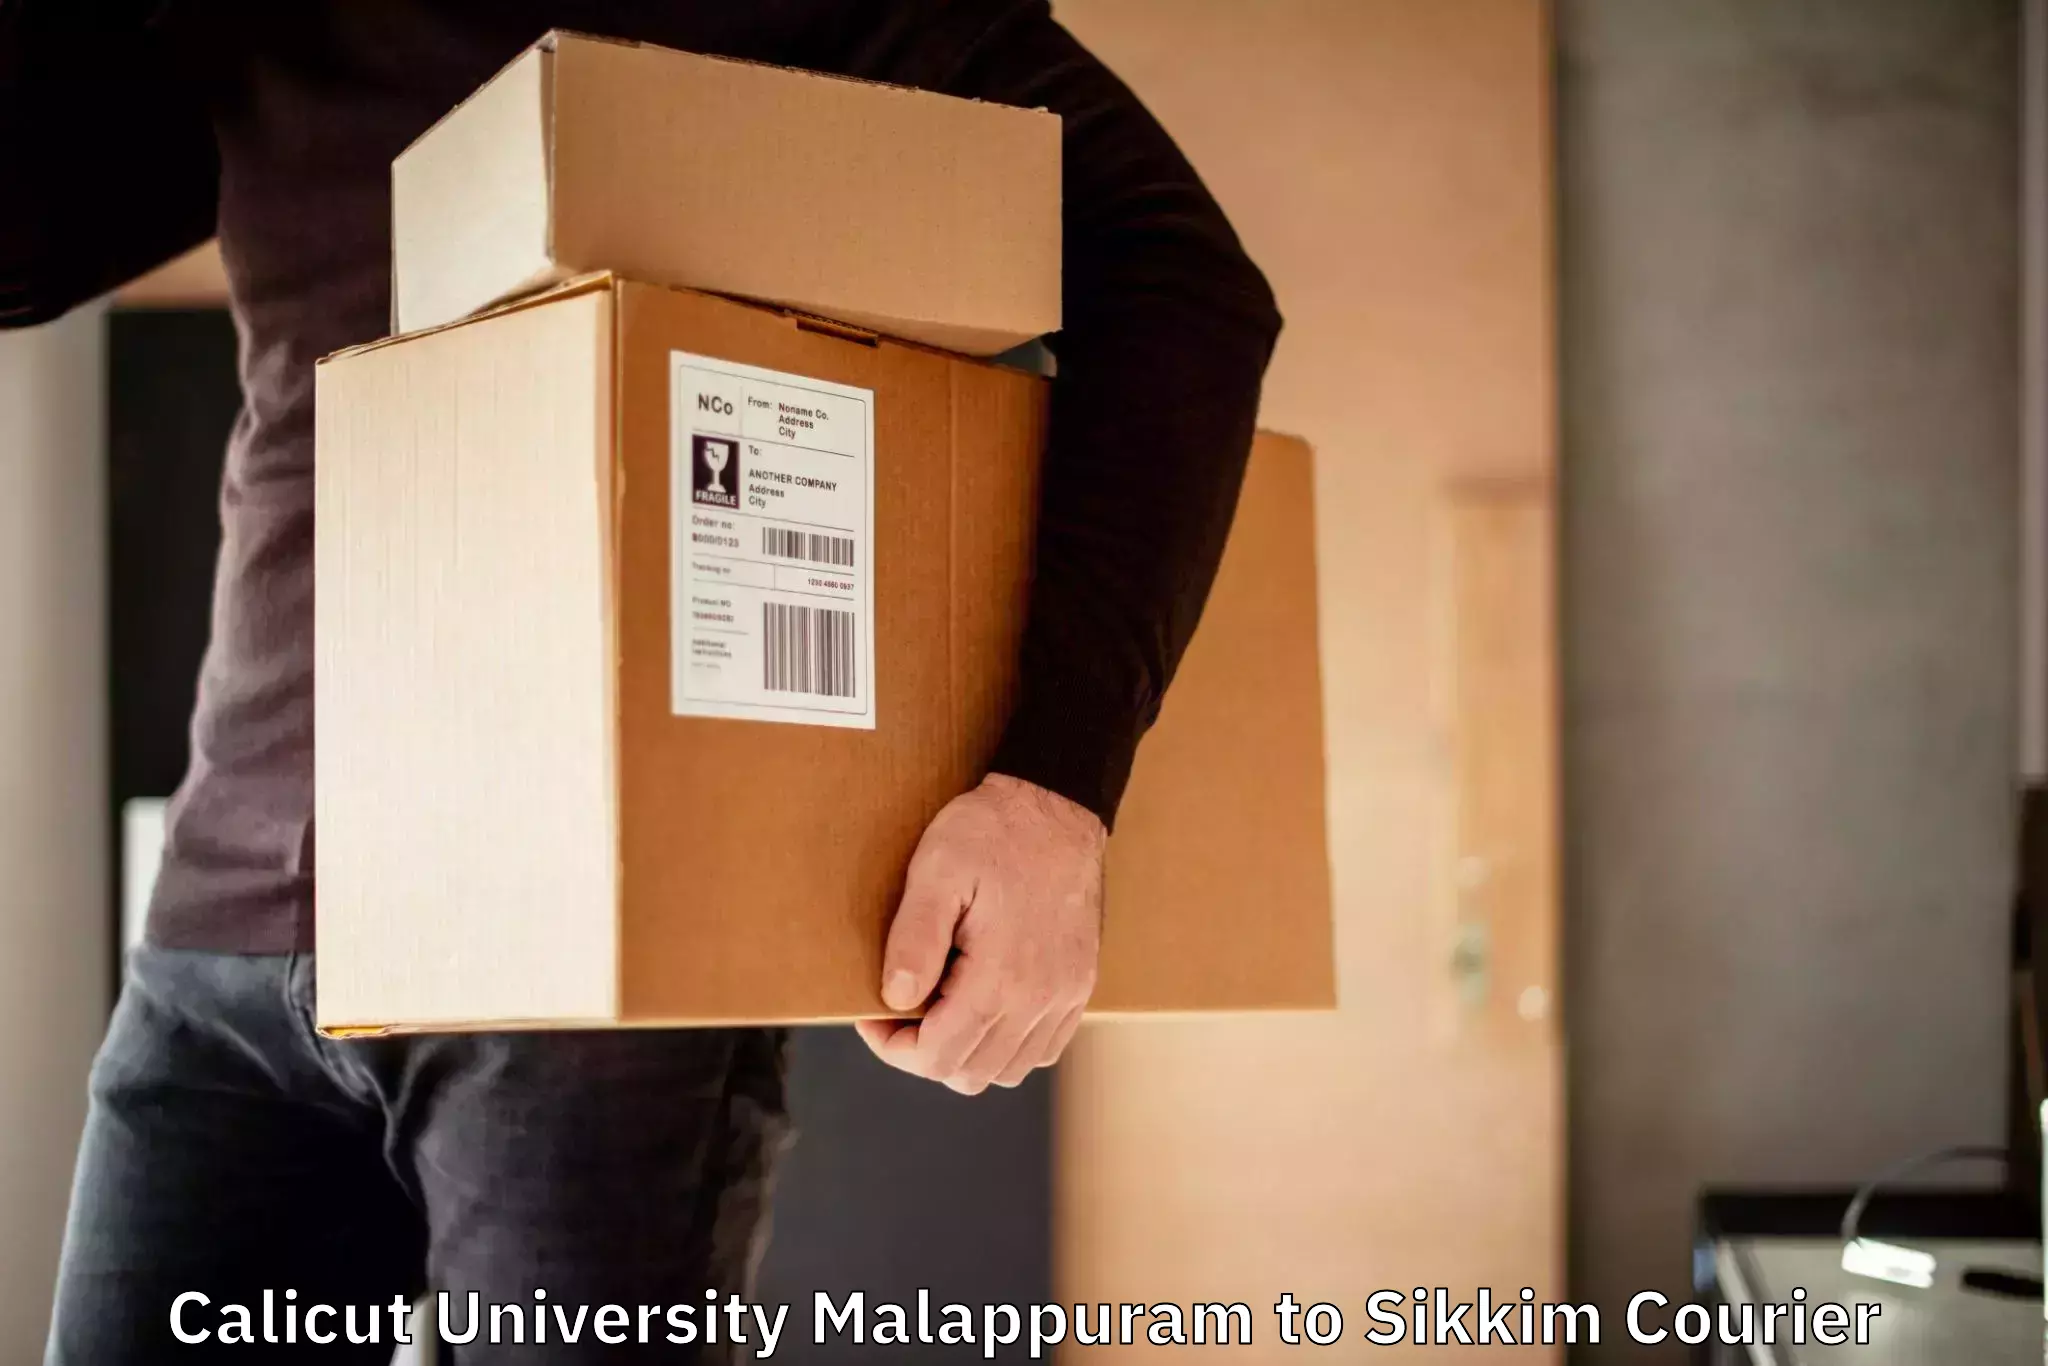 Customer-oriented courier services Calicut University Malappuram to East Sikkim